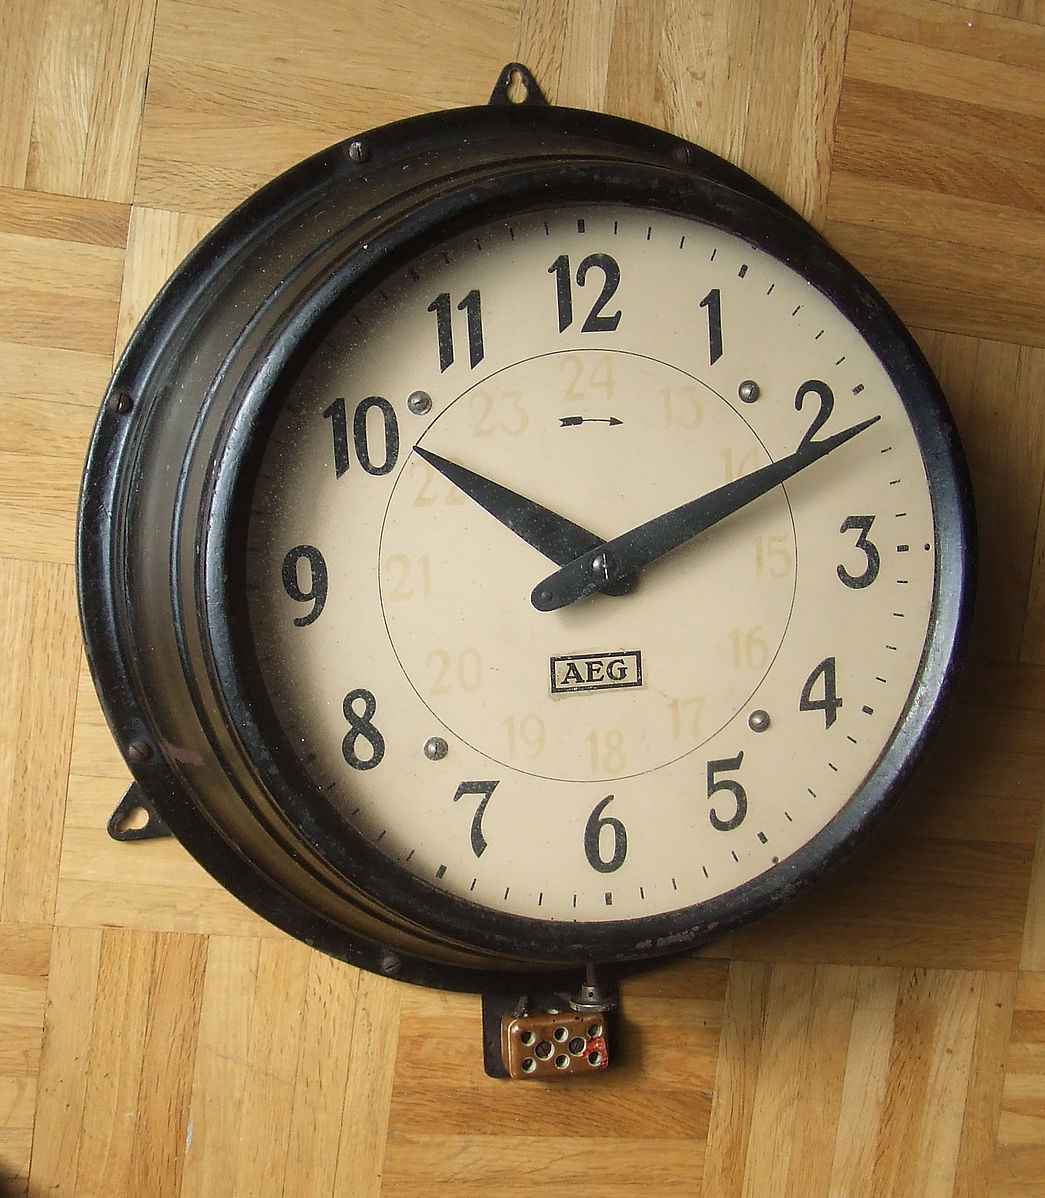 A wall clock with a white face and black numbers